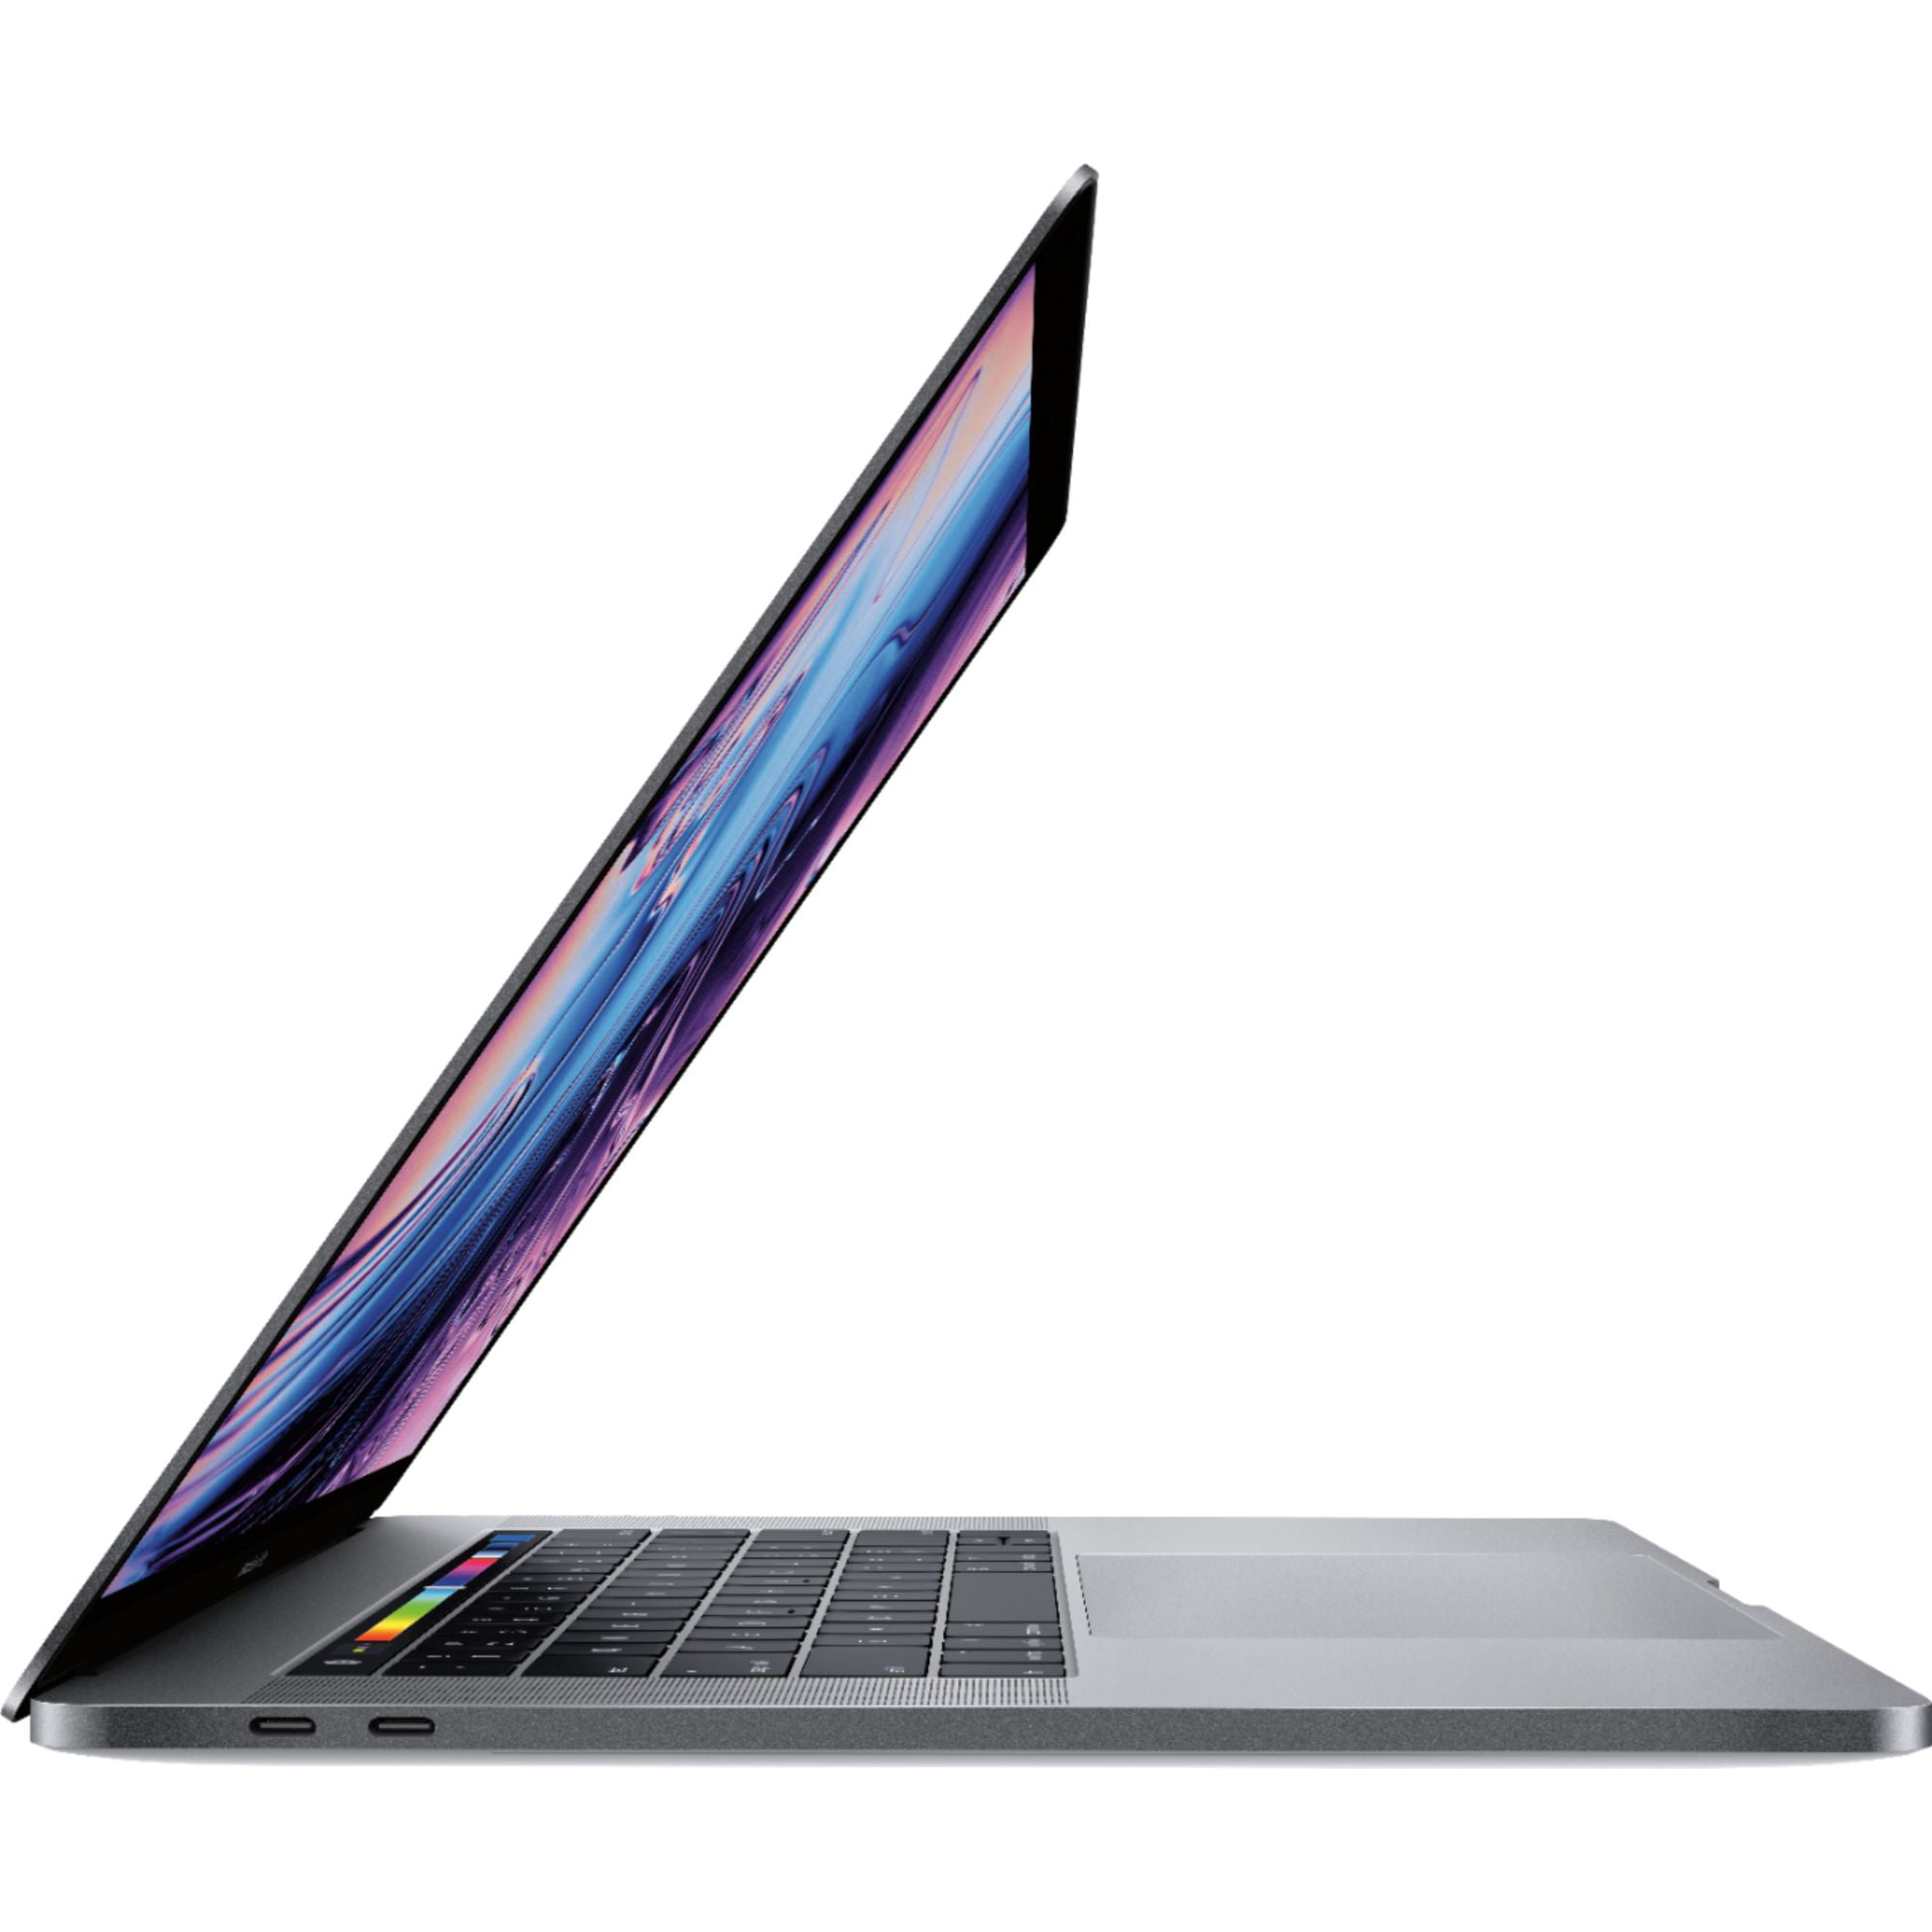 Restored Apple MacBook Pro 15.4-inch 2019 with Touch Bar MV902LL/A 